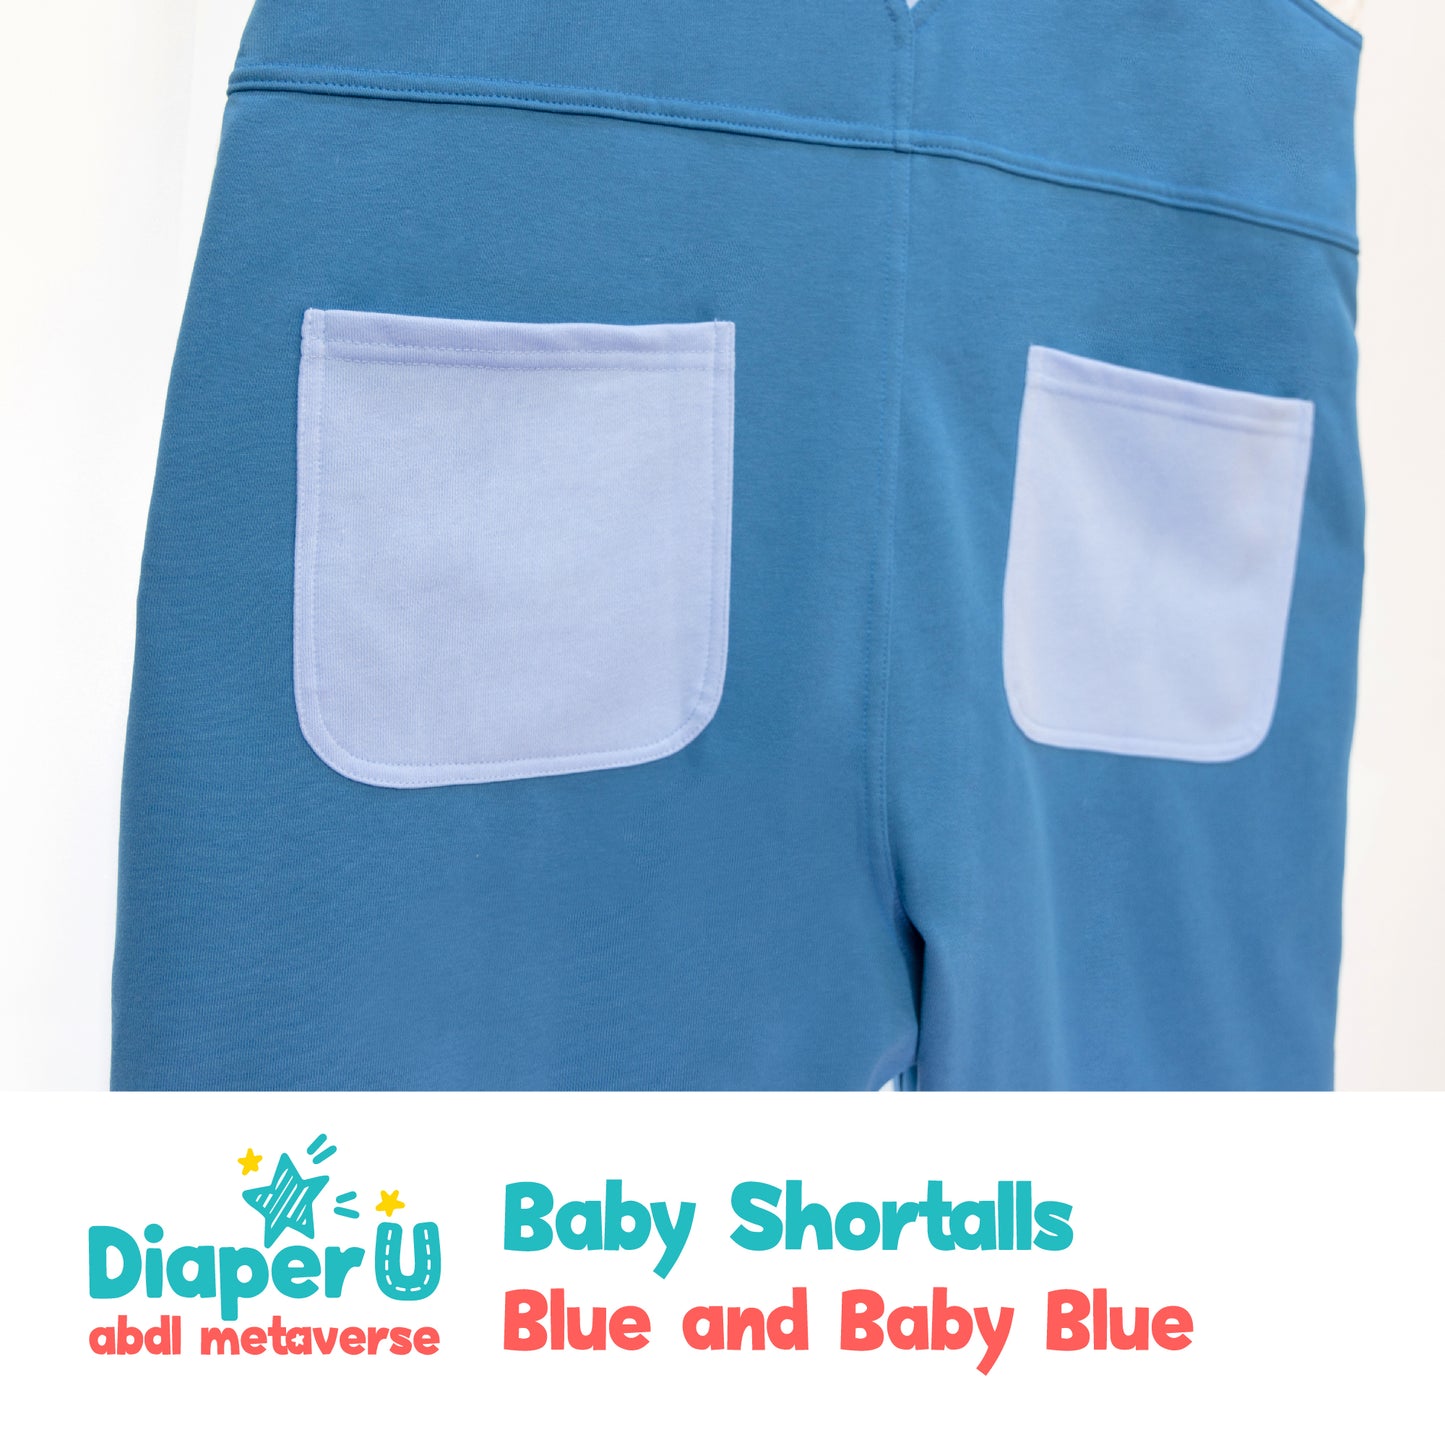 Baby Shortalls - Blue and Baby Blue (Unisex)